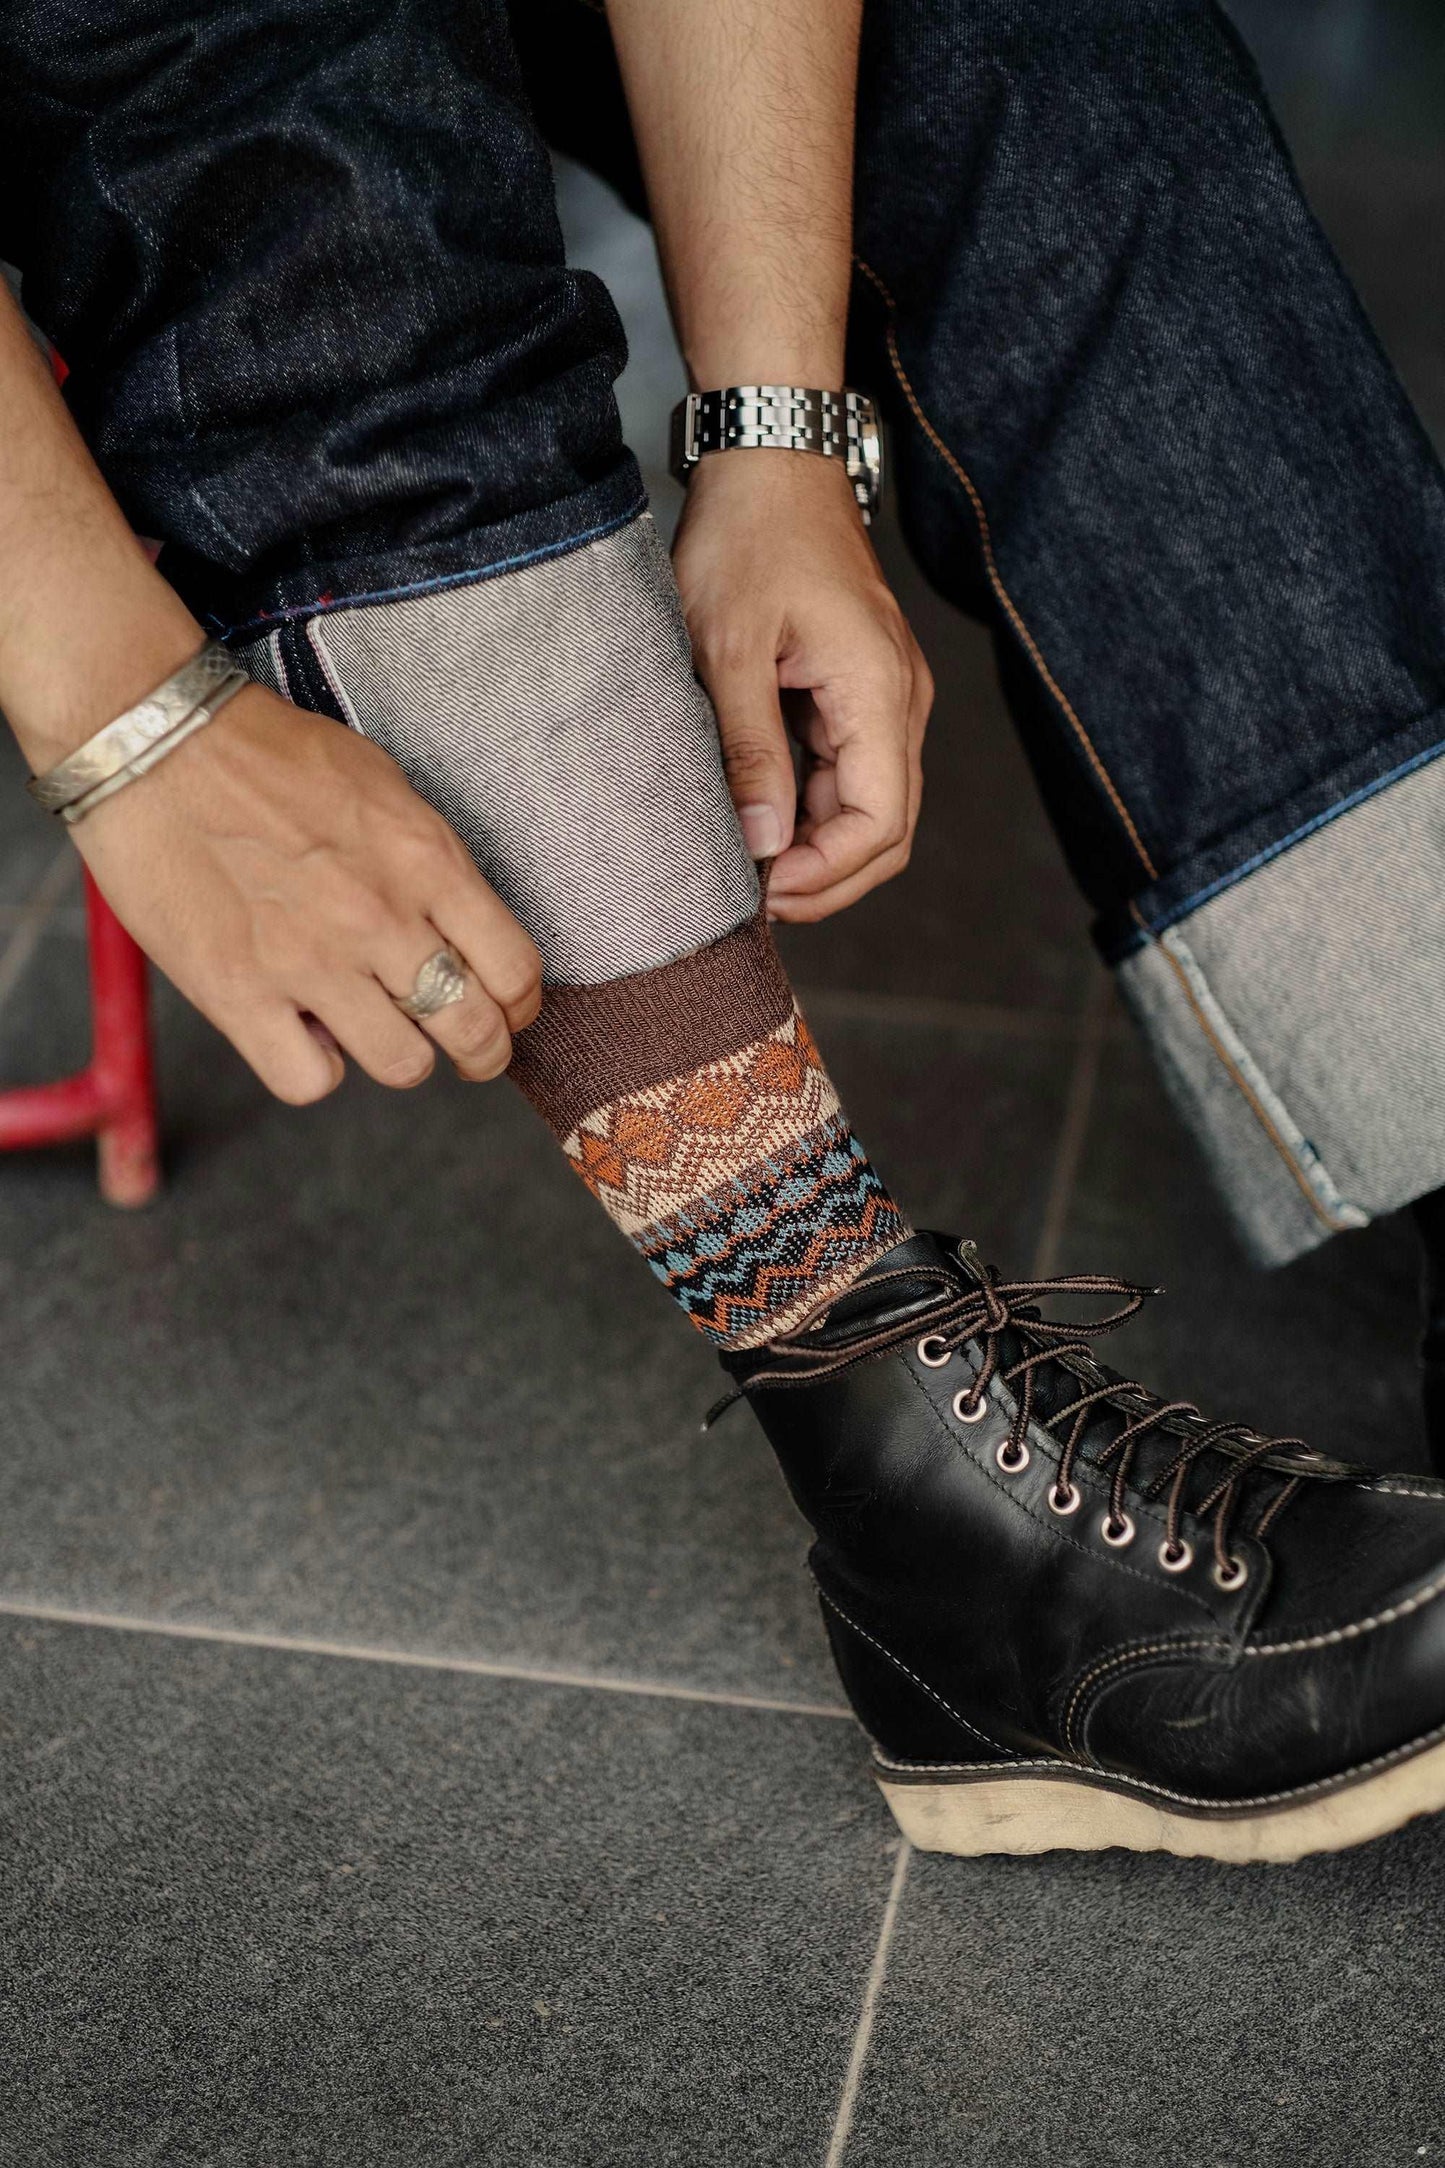 kanazawa brown tribal socks with black red wing shoesd wing shoes